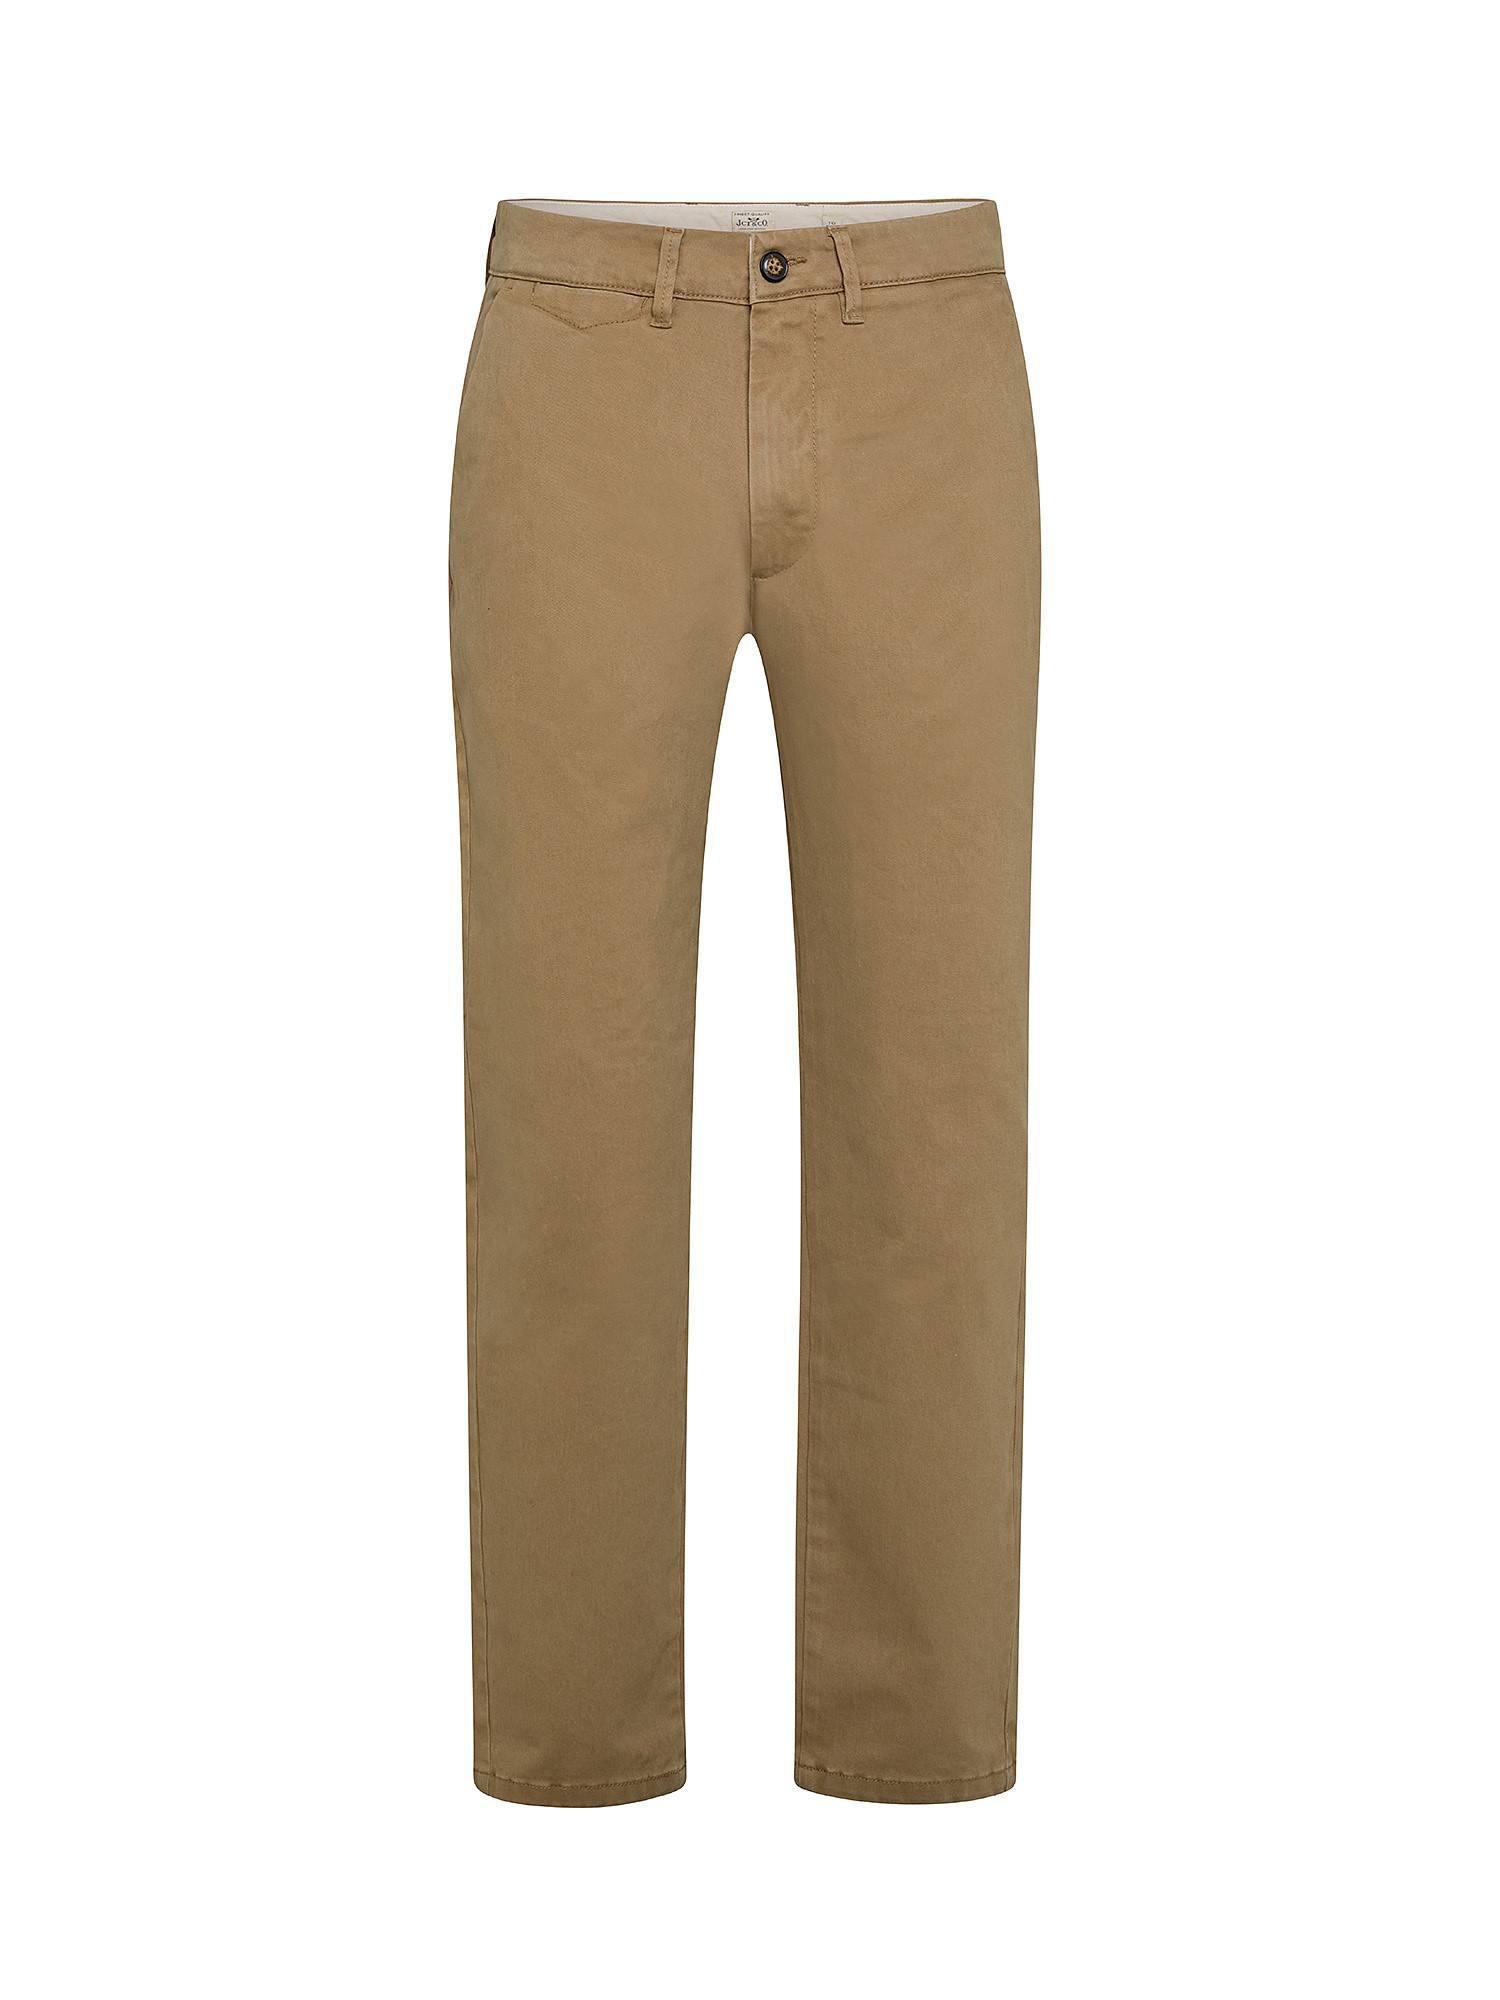 Pantalone chinos in cotone stretch, Marrone chiaro, large image number 0